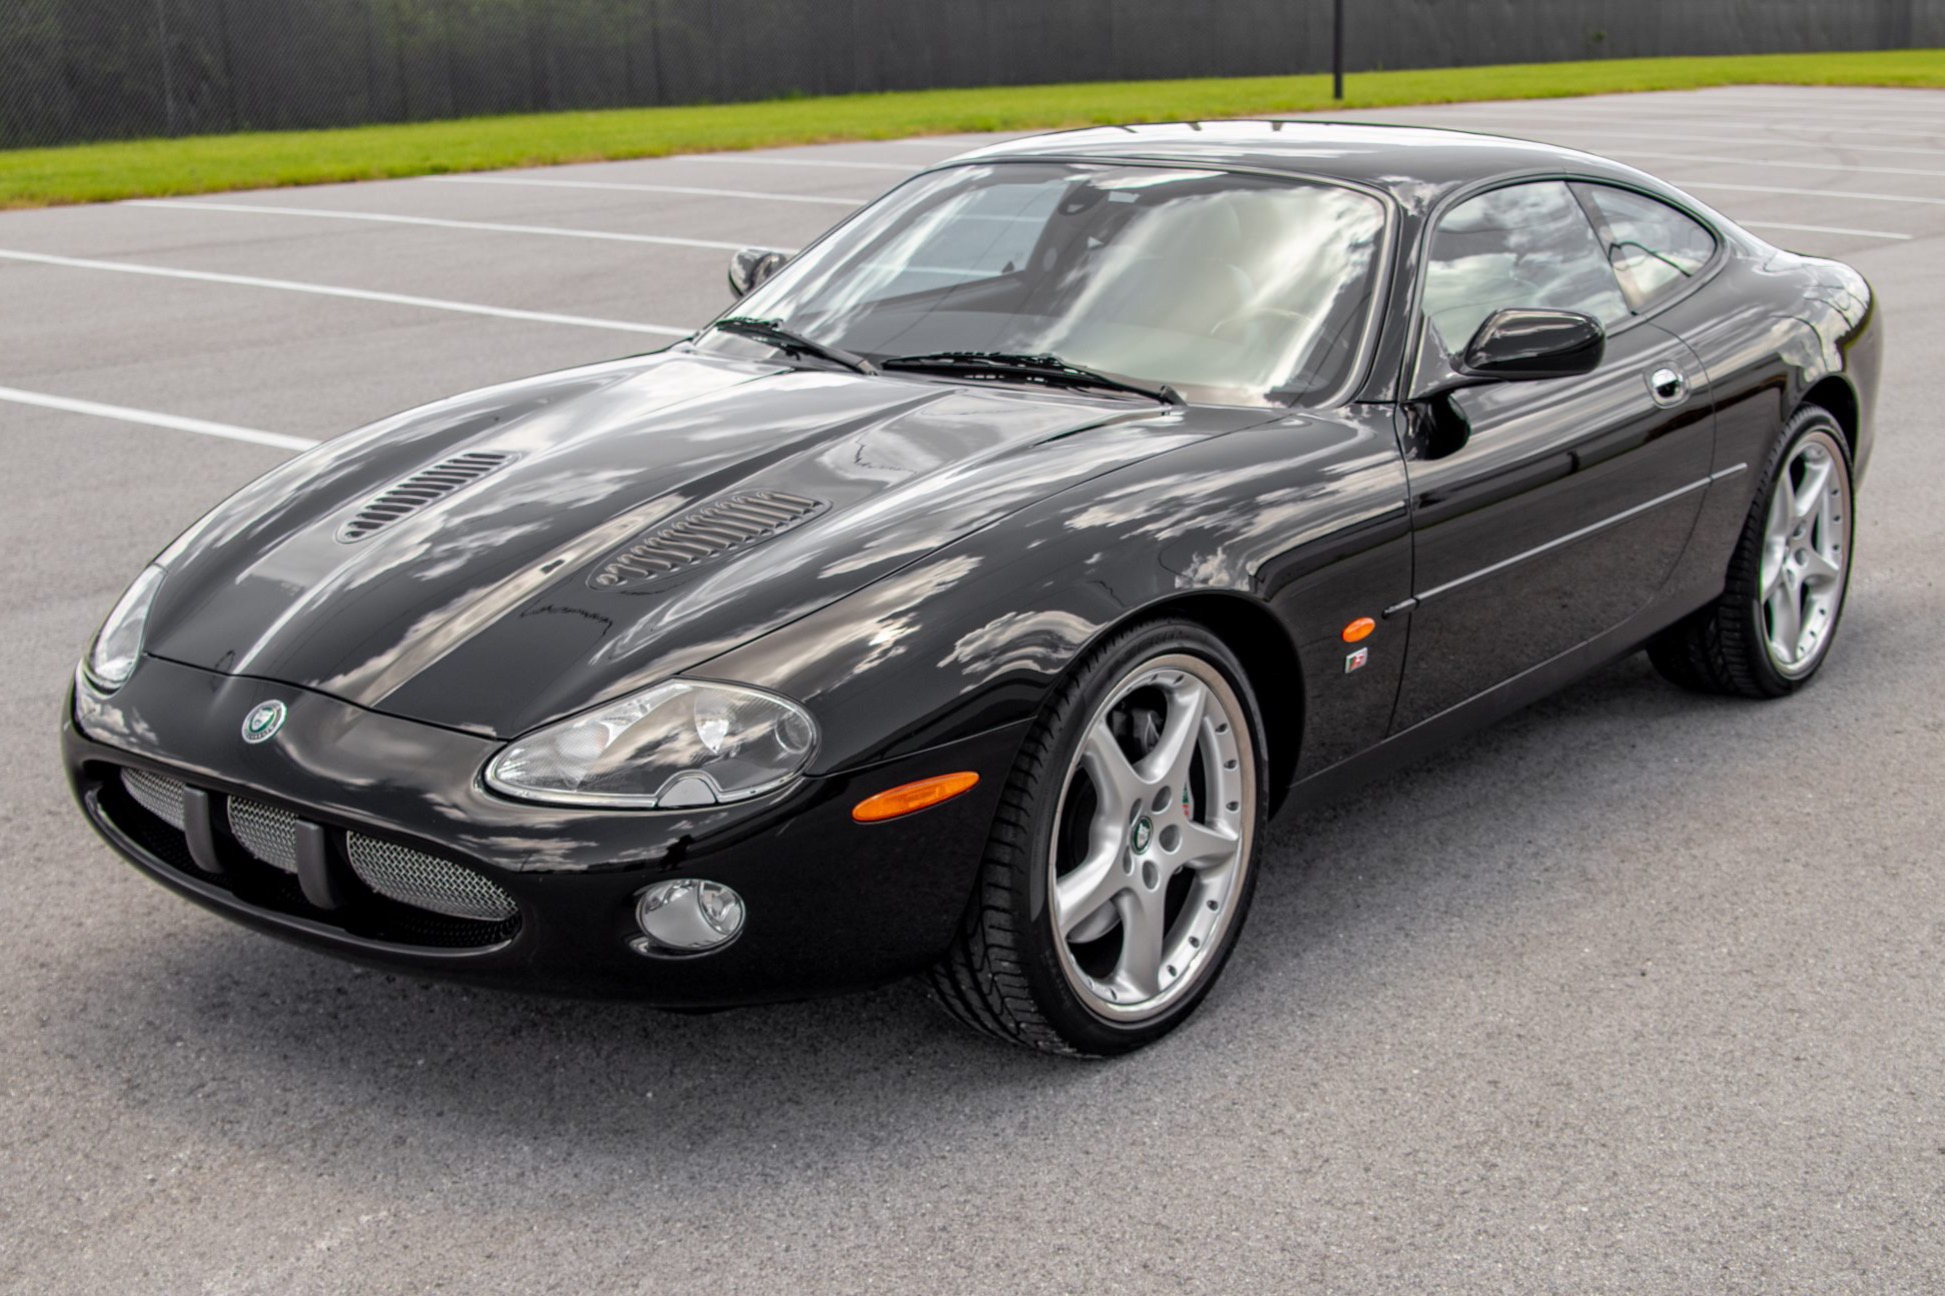 9k-Mile 2003 Jaguar XKR Coupe for sale on BaT Auctions - sold for $36,000  on August 24, 2021 (Lot #53,759) | Bring a Trailer